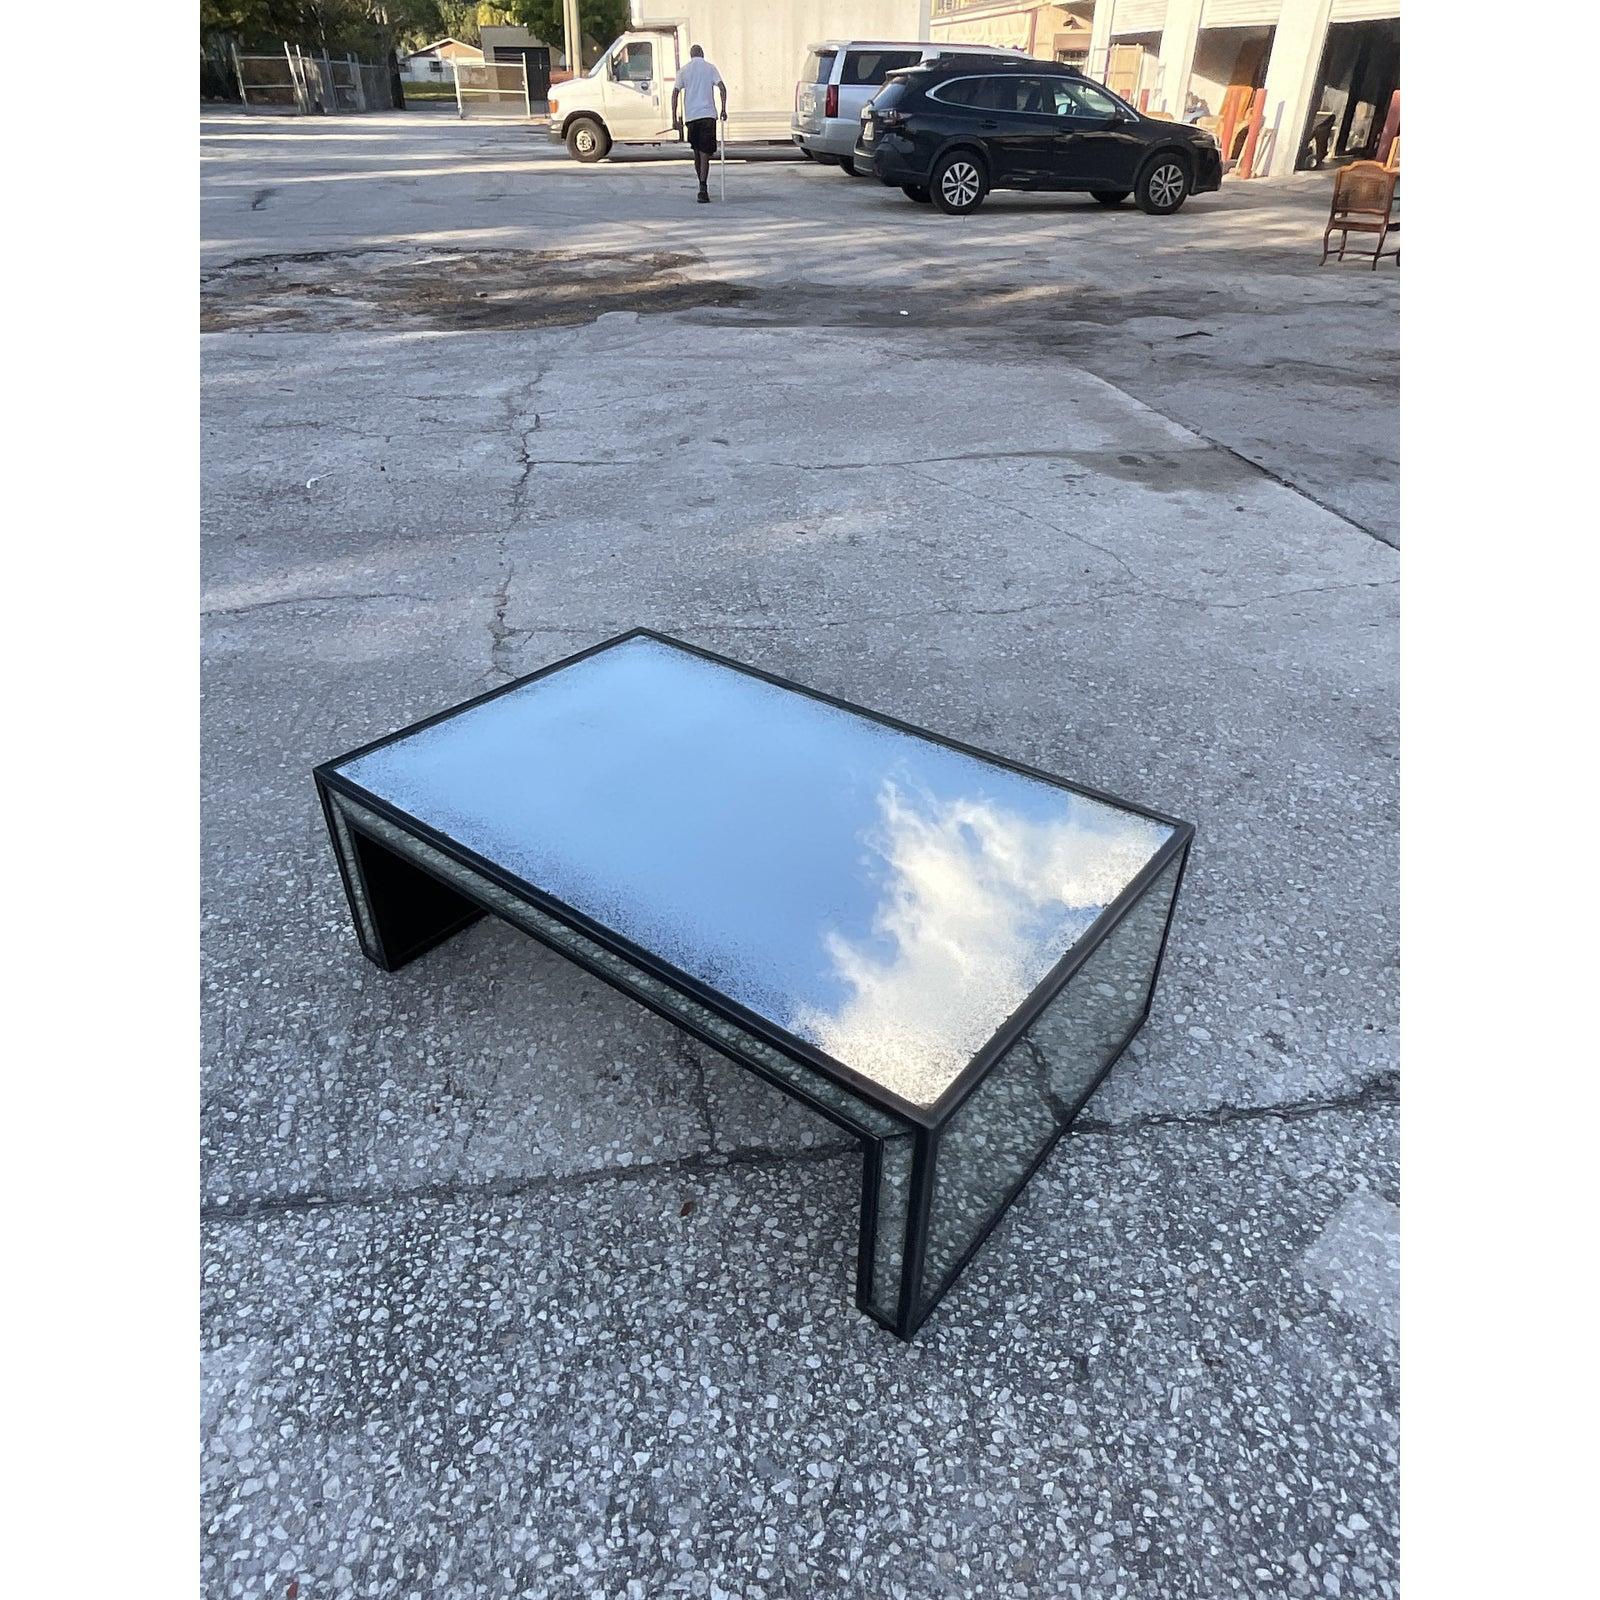 Gorgeous vintage Regency coffee table. Chic black frame with inset antiqued mirrored panels. Would look great in so many different décor styles.